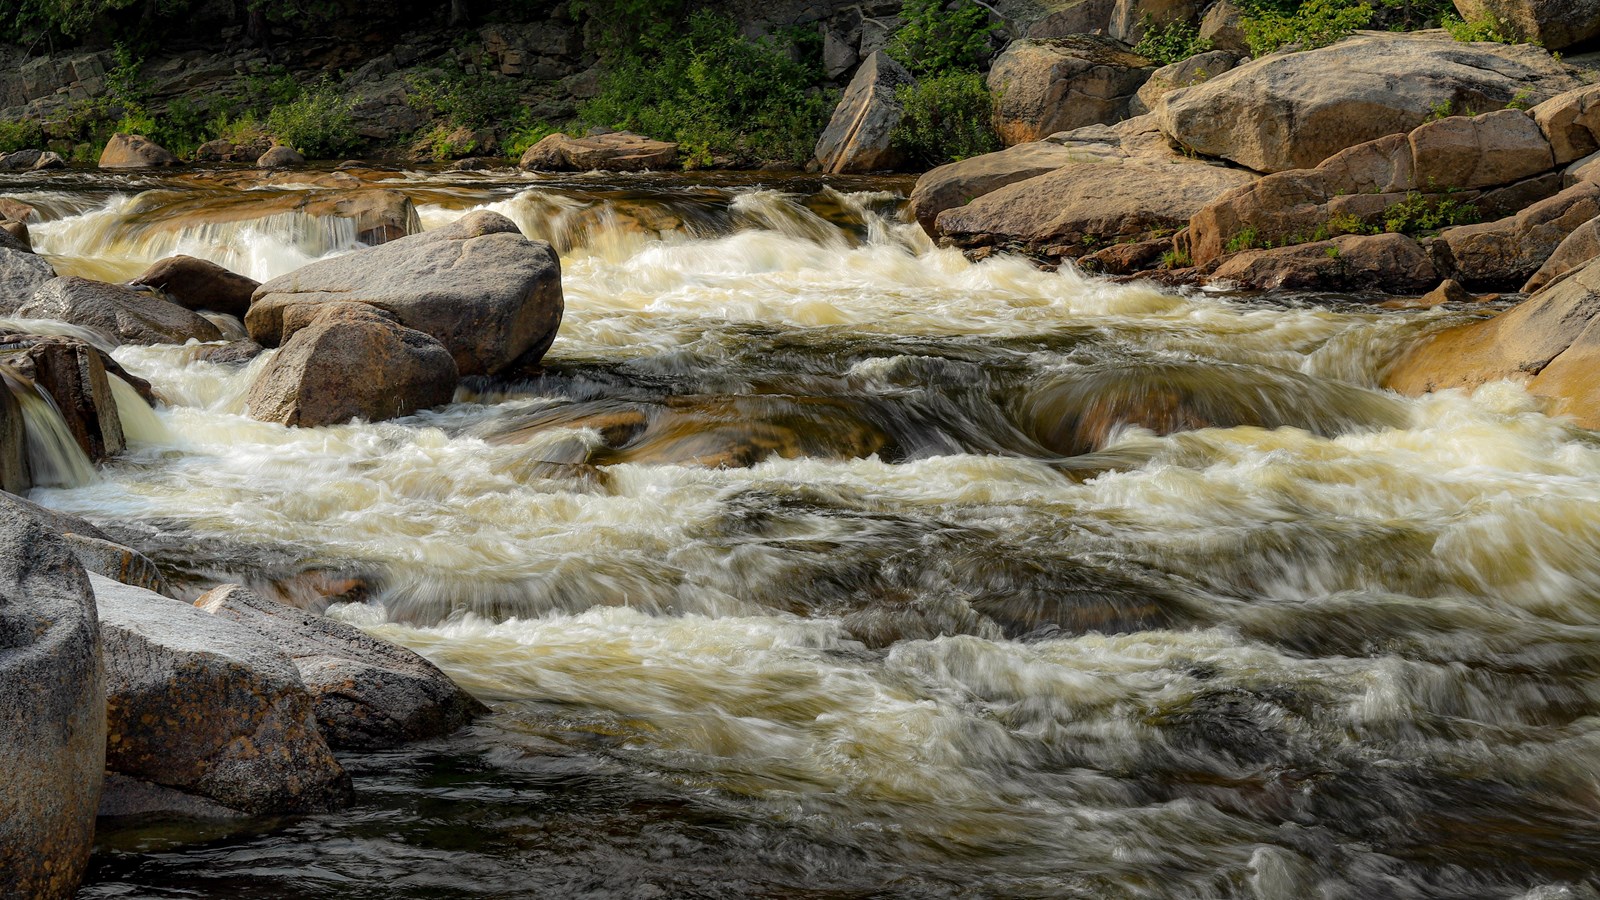 White water rushes between large boulders to form short waterfalls in the stream